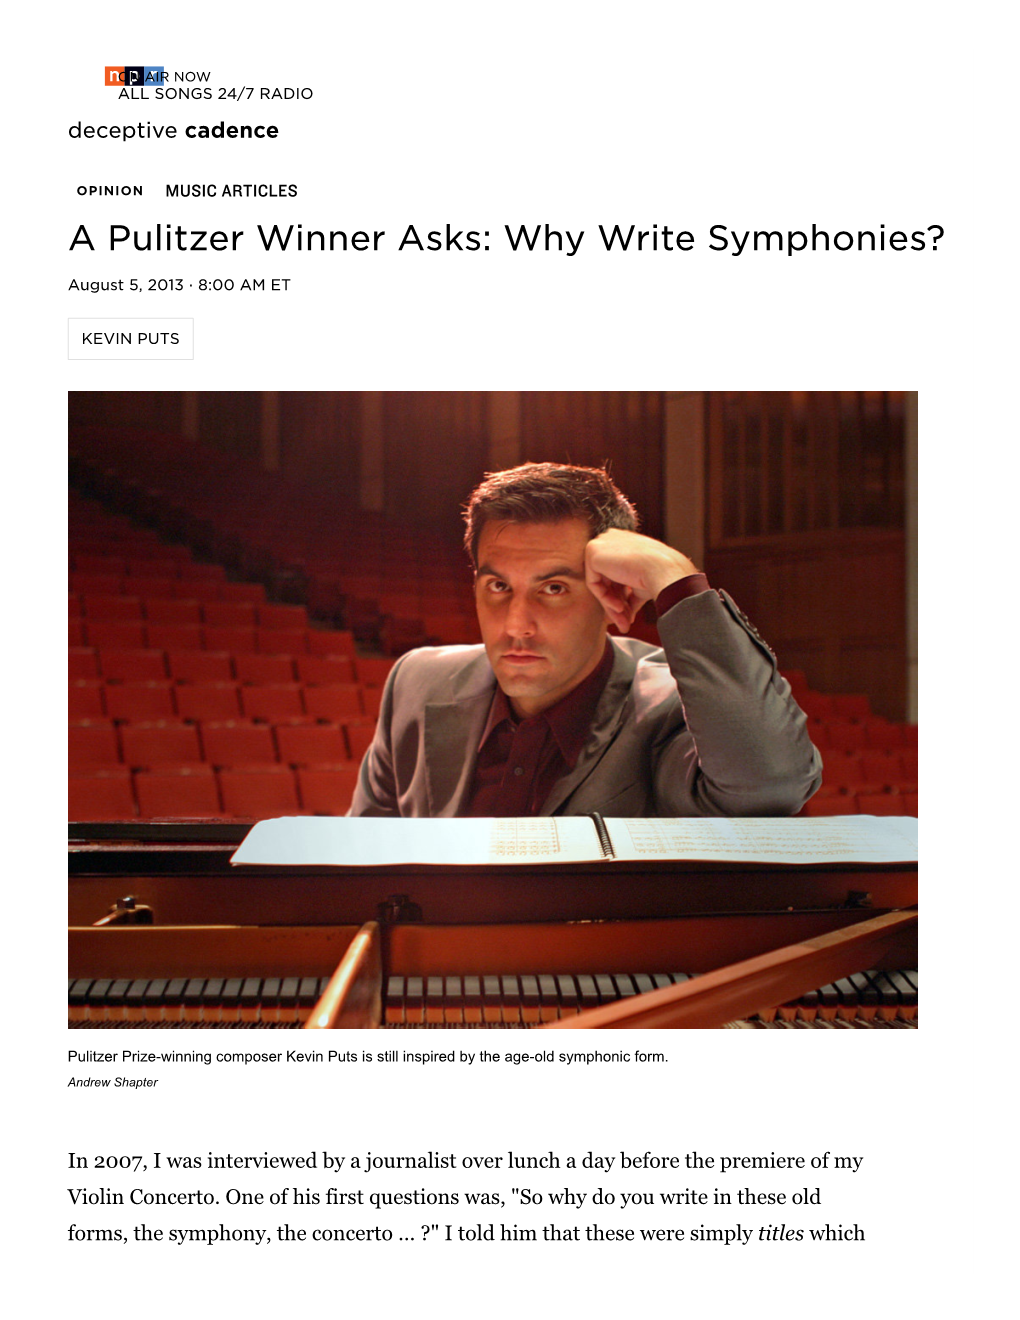 A Pulitzer Winner Asks: Why Write Symphonies?